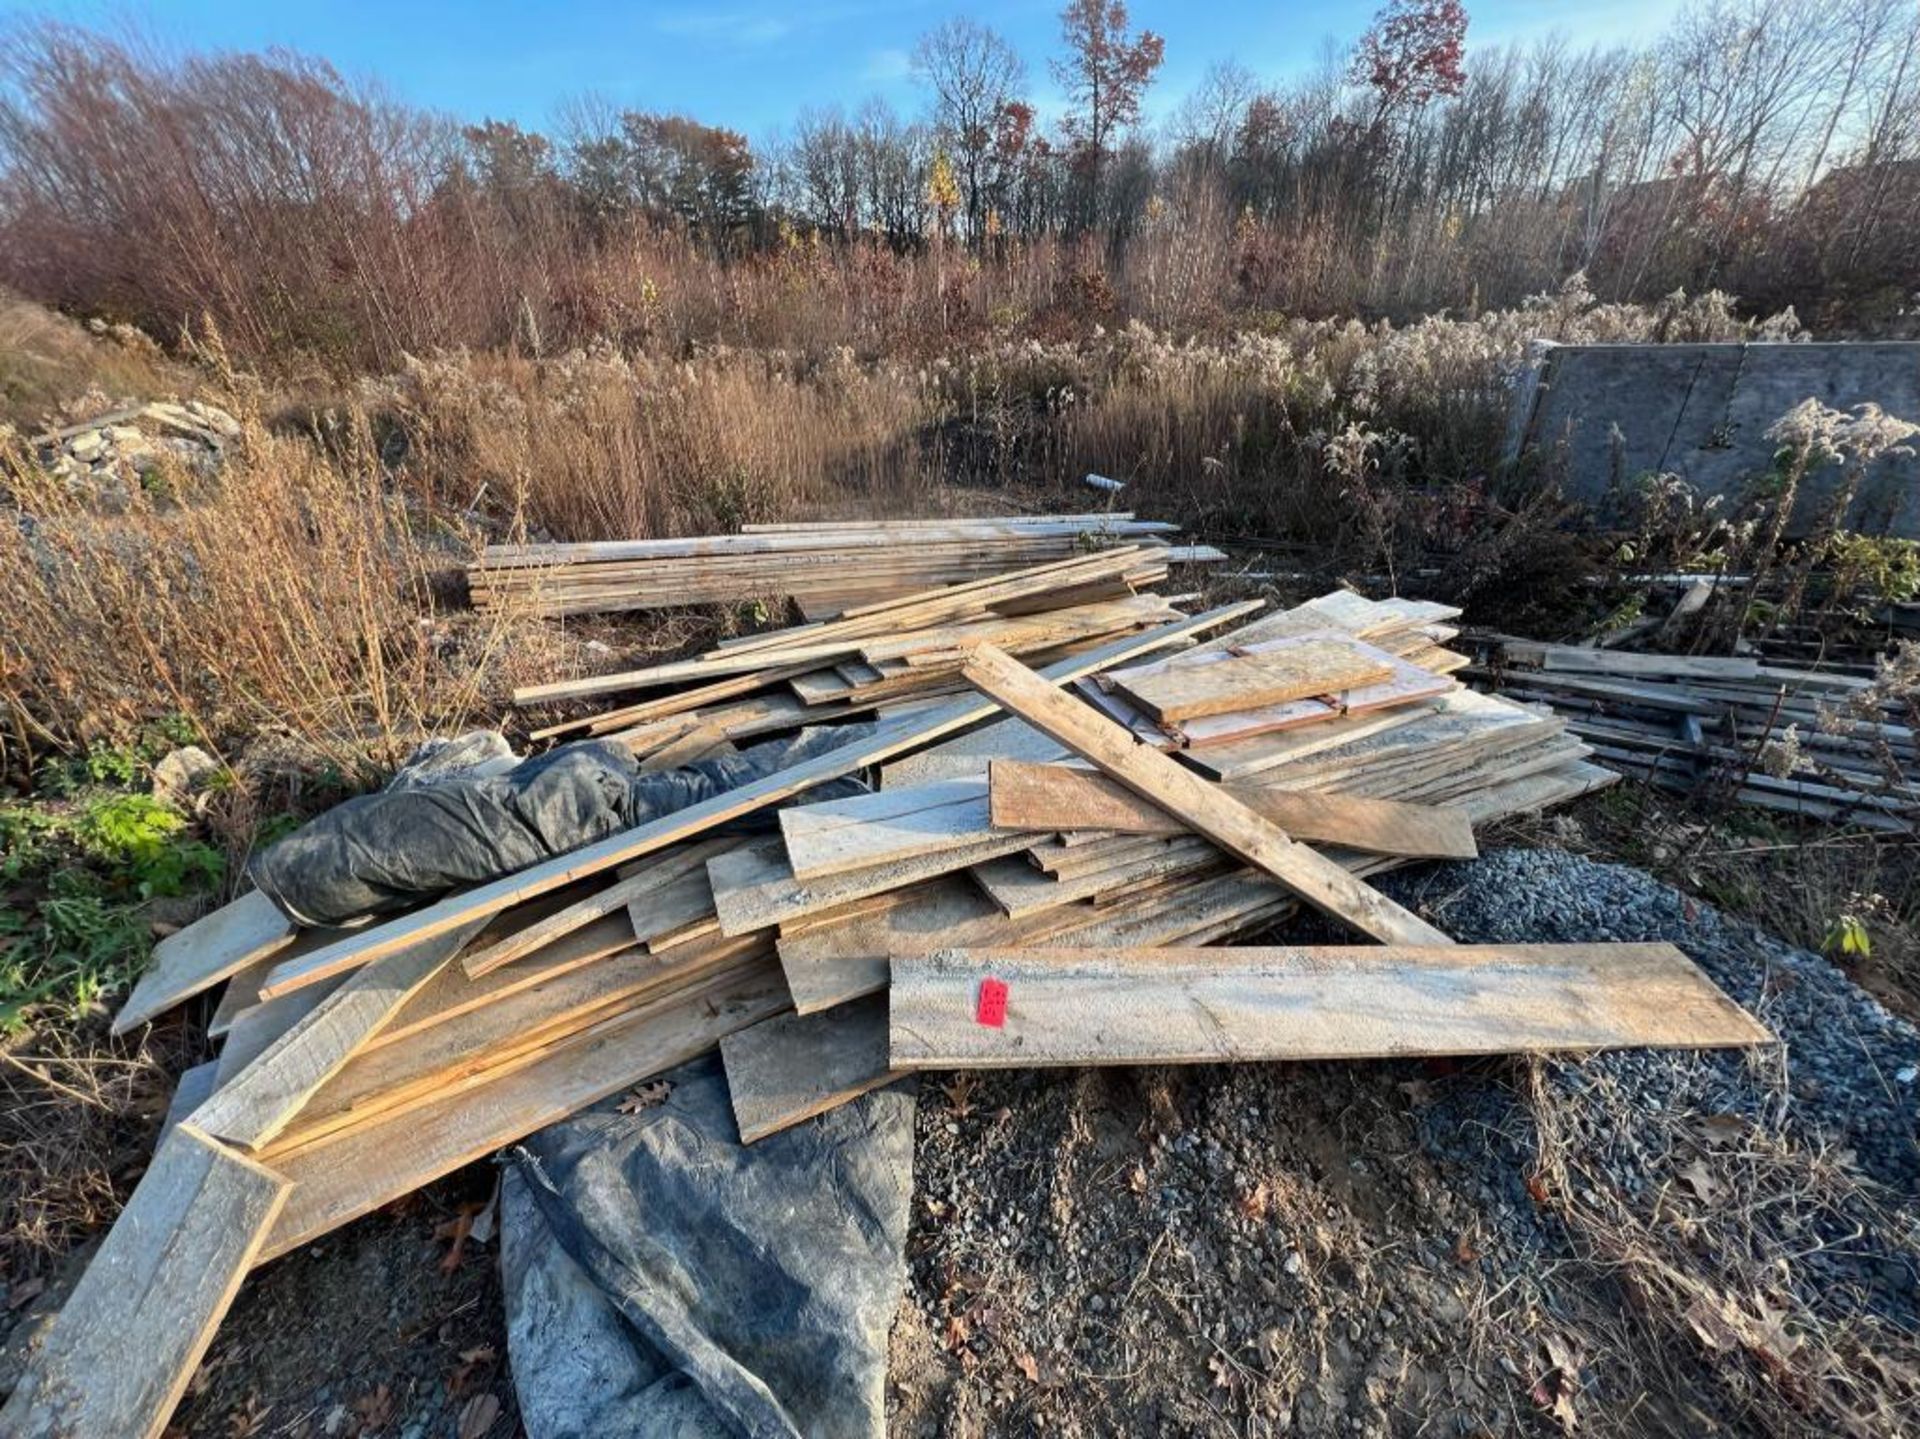 Misc. Form Lumber, located in Latham, NY. - Image 2 of 2